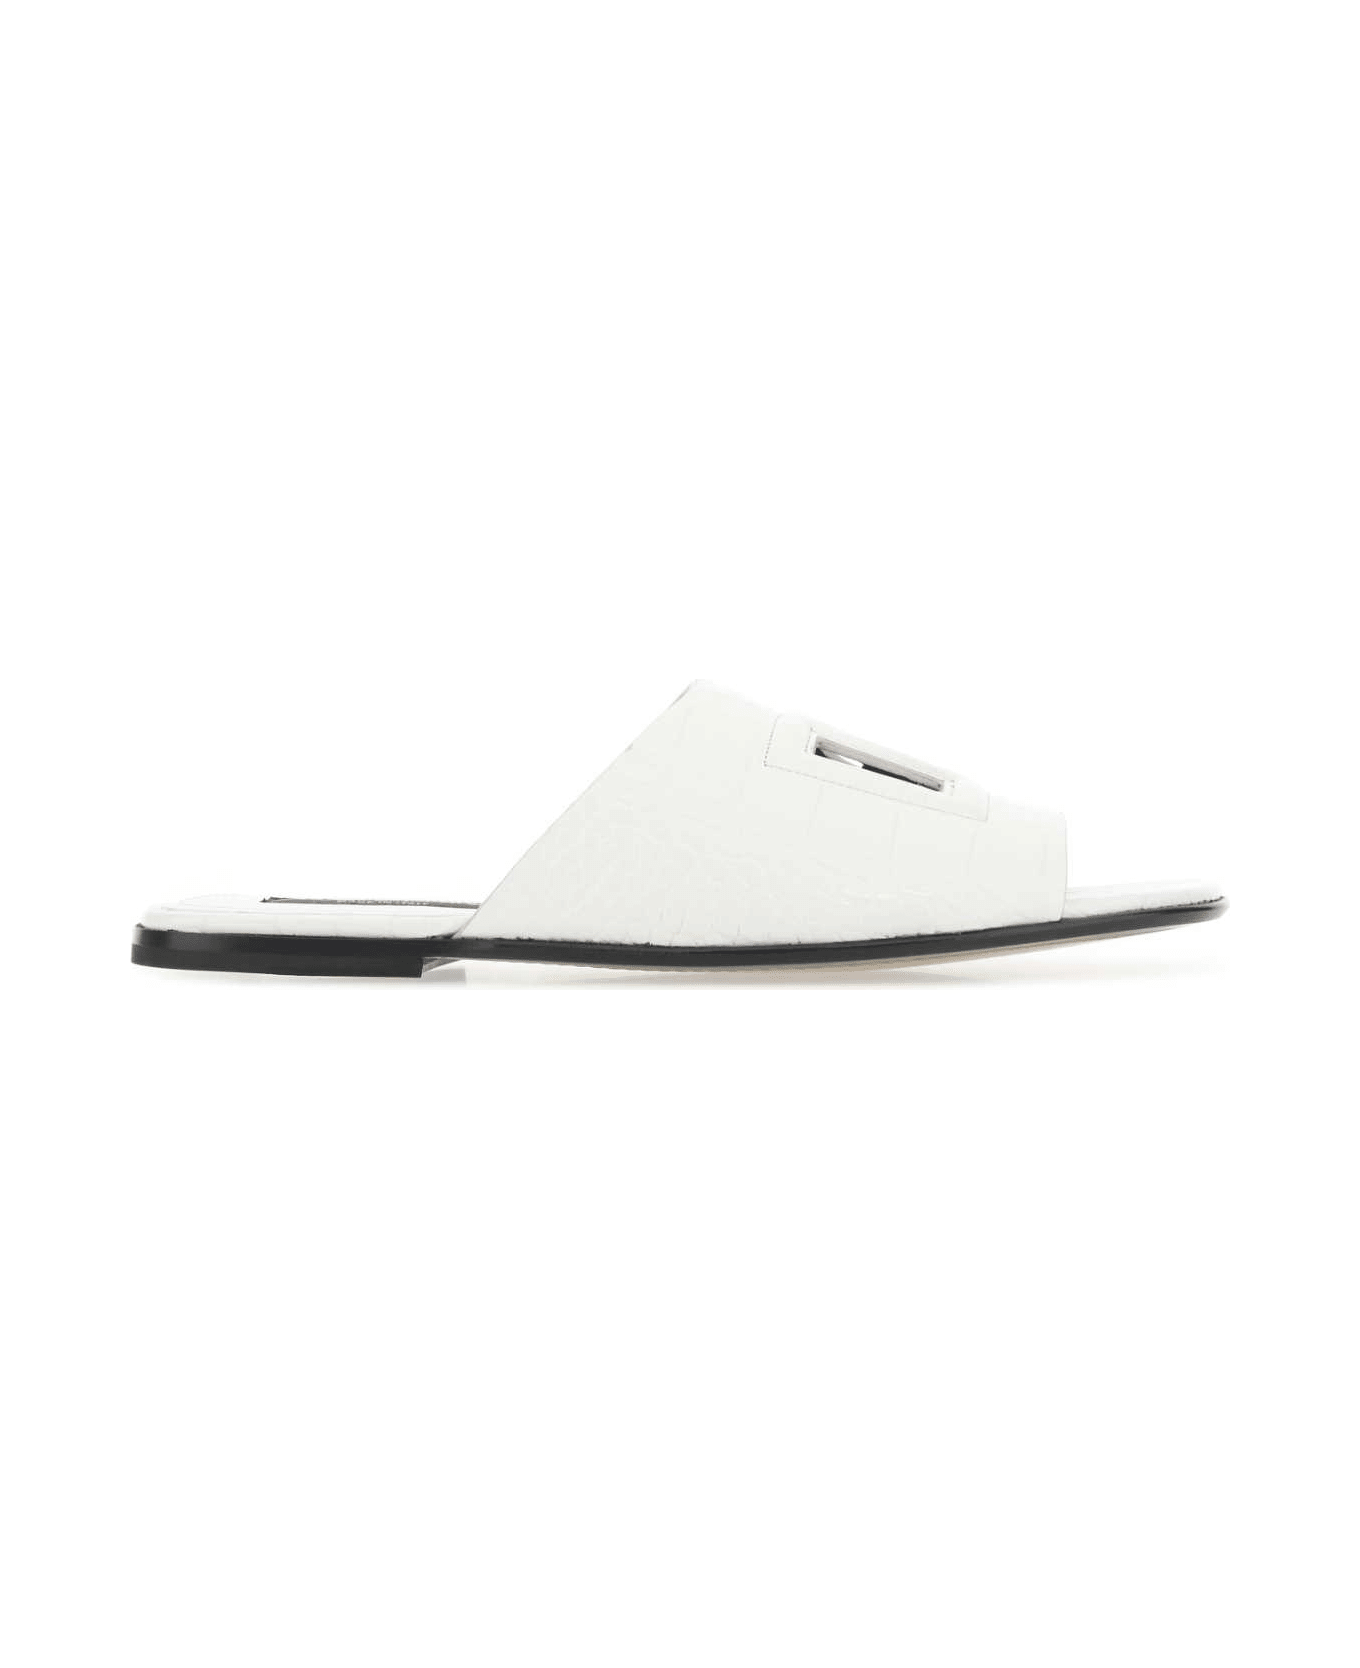 Dolce & Gabbana White Leather Slippers - 8H006 その他各種シューズ